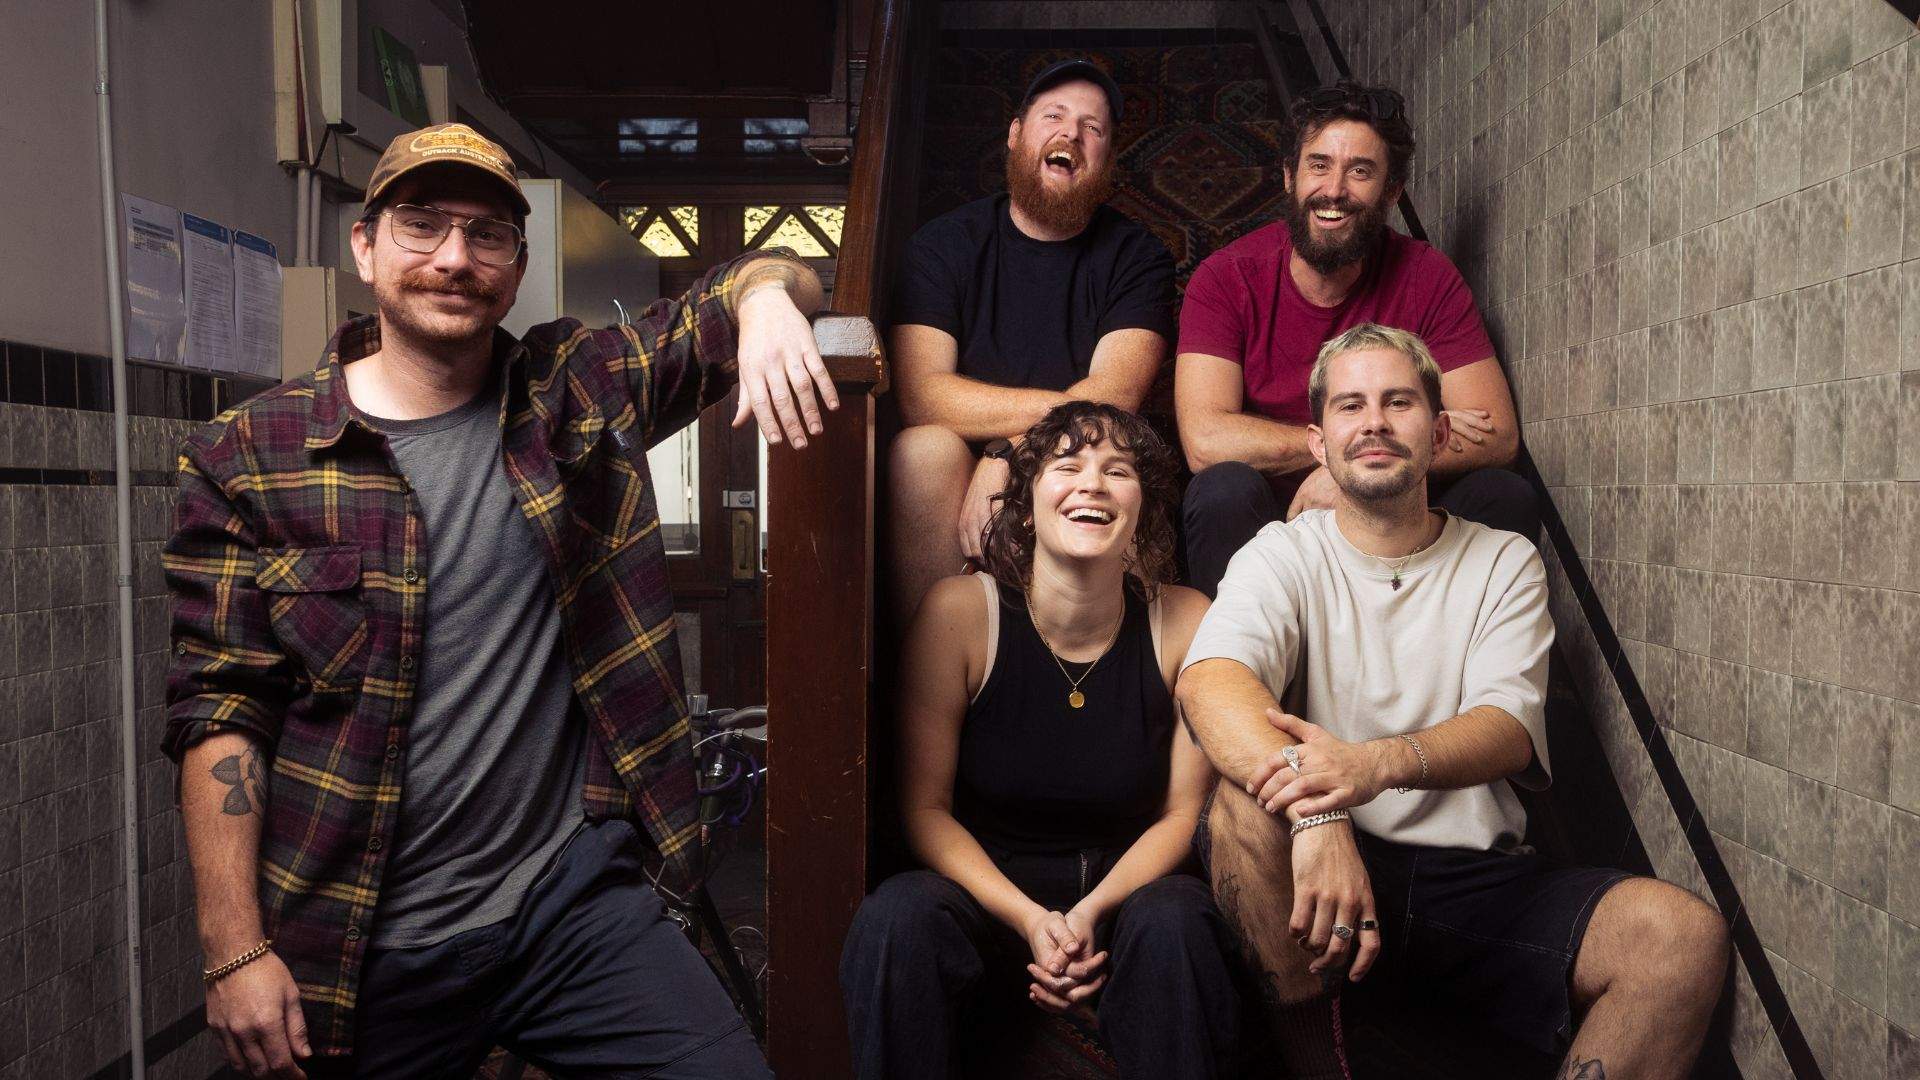 The five-person crew behind the reopening of The Bat & Ball Hotel in Redfern, including Rachael Paul, Cameron Votano, Zachary Godbolt, Daniel McBride and Dynn Szmulewicz.